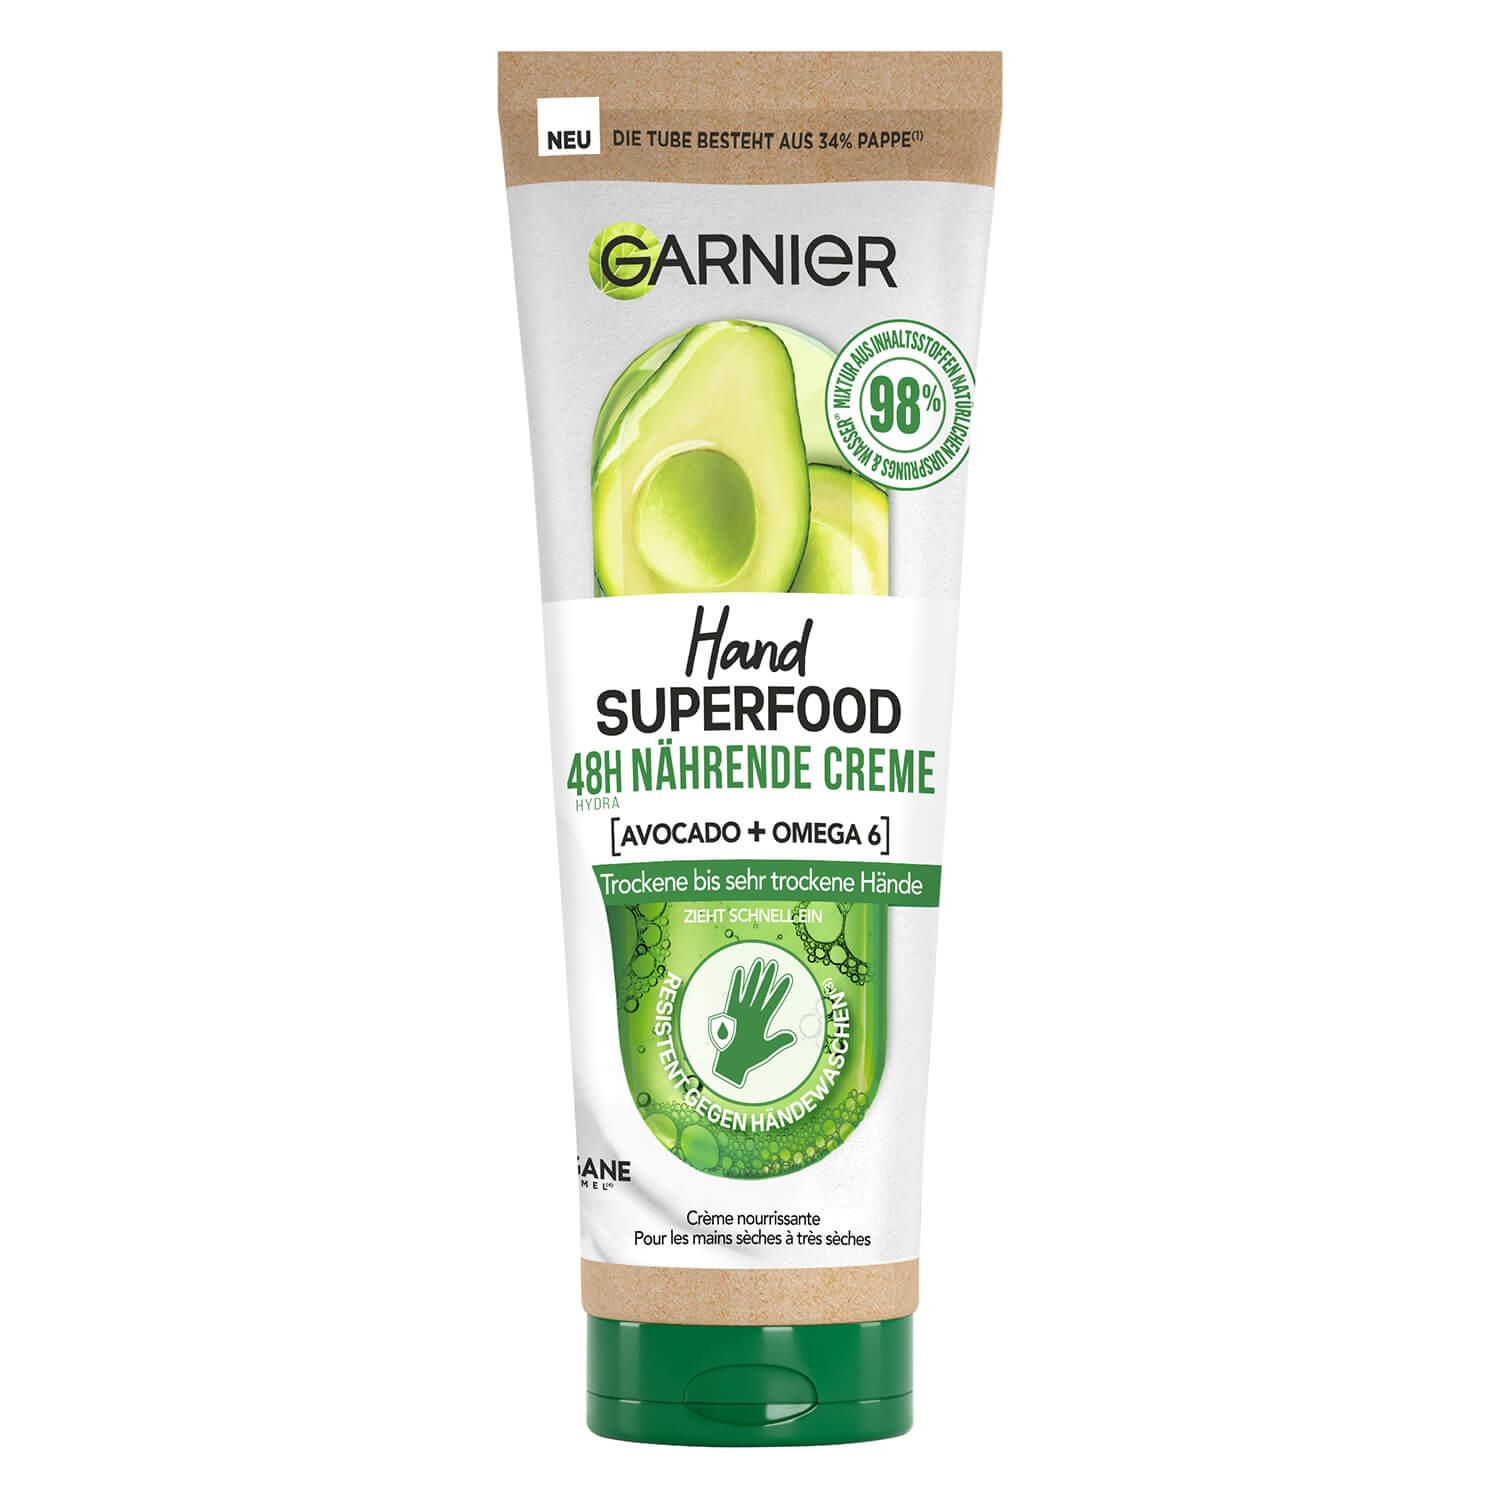 Skinactive Body - Hand Superfood 48H Crème Hydratant Pour Les Mains Avocado + Omega-6